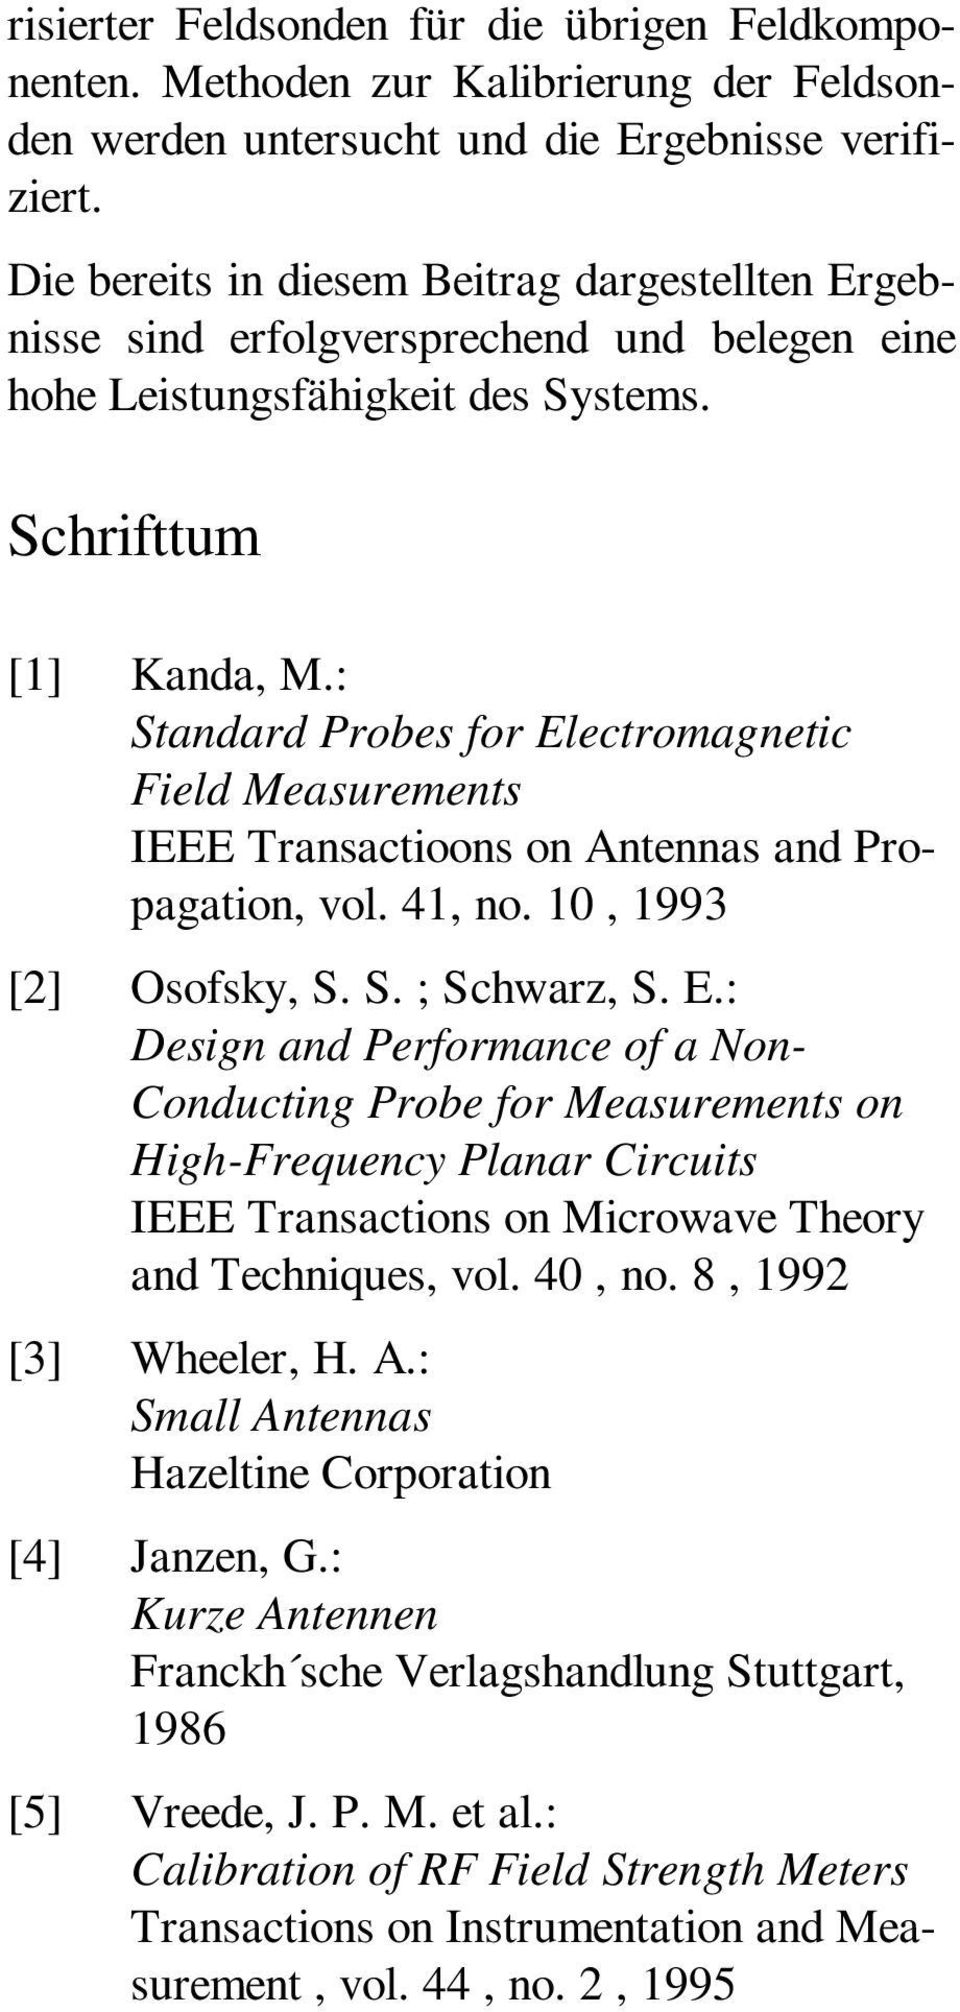 : Standad Pobes fo Electomagnetic Field Measuements IEEE Tansactioons on Antennas and Popagation, vol. 41, no. 1, 1993 [2] Osofsky, S. S. ; Schwaz, S. E.: Design and Pefomance of a Non- Conducting Pobe fo Measuements on High-Fequency Plana Cicuits IEEE Tansactions on Micowave Theoy and Techniques, vol.